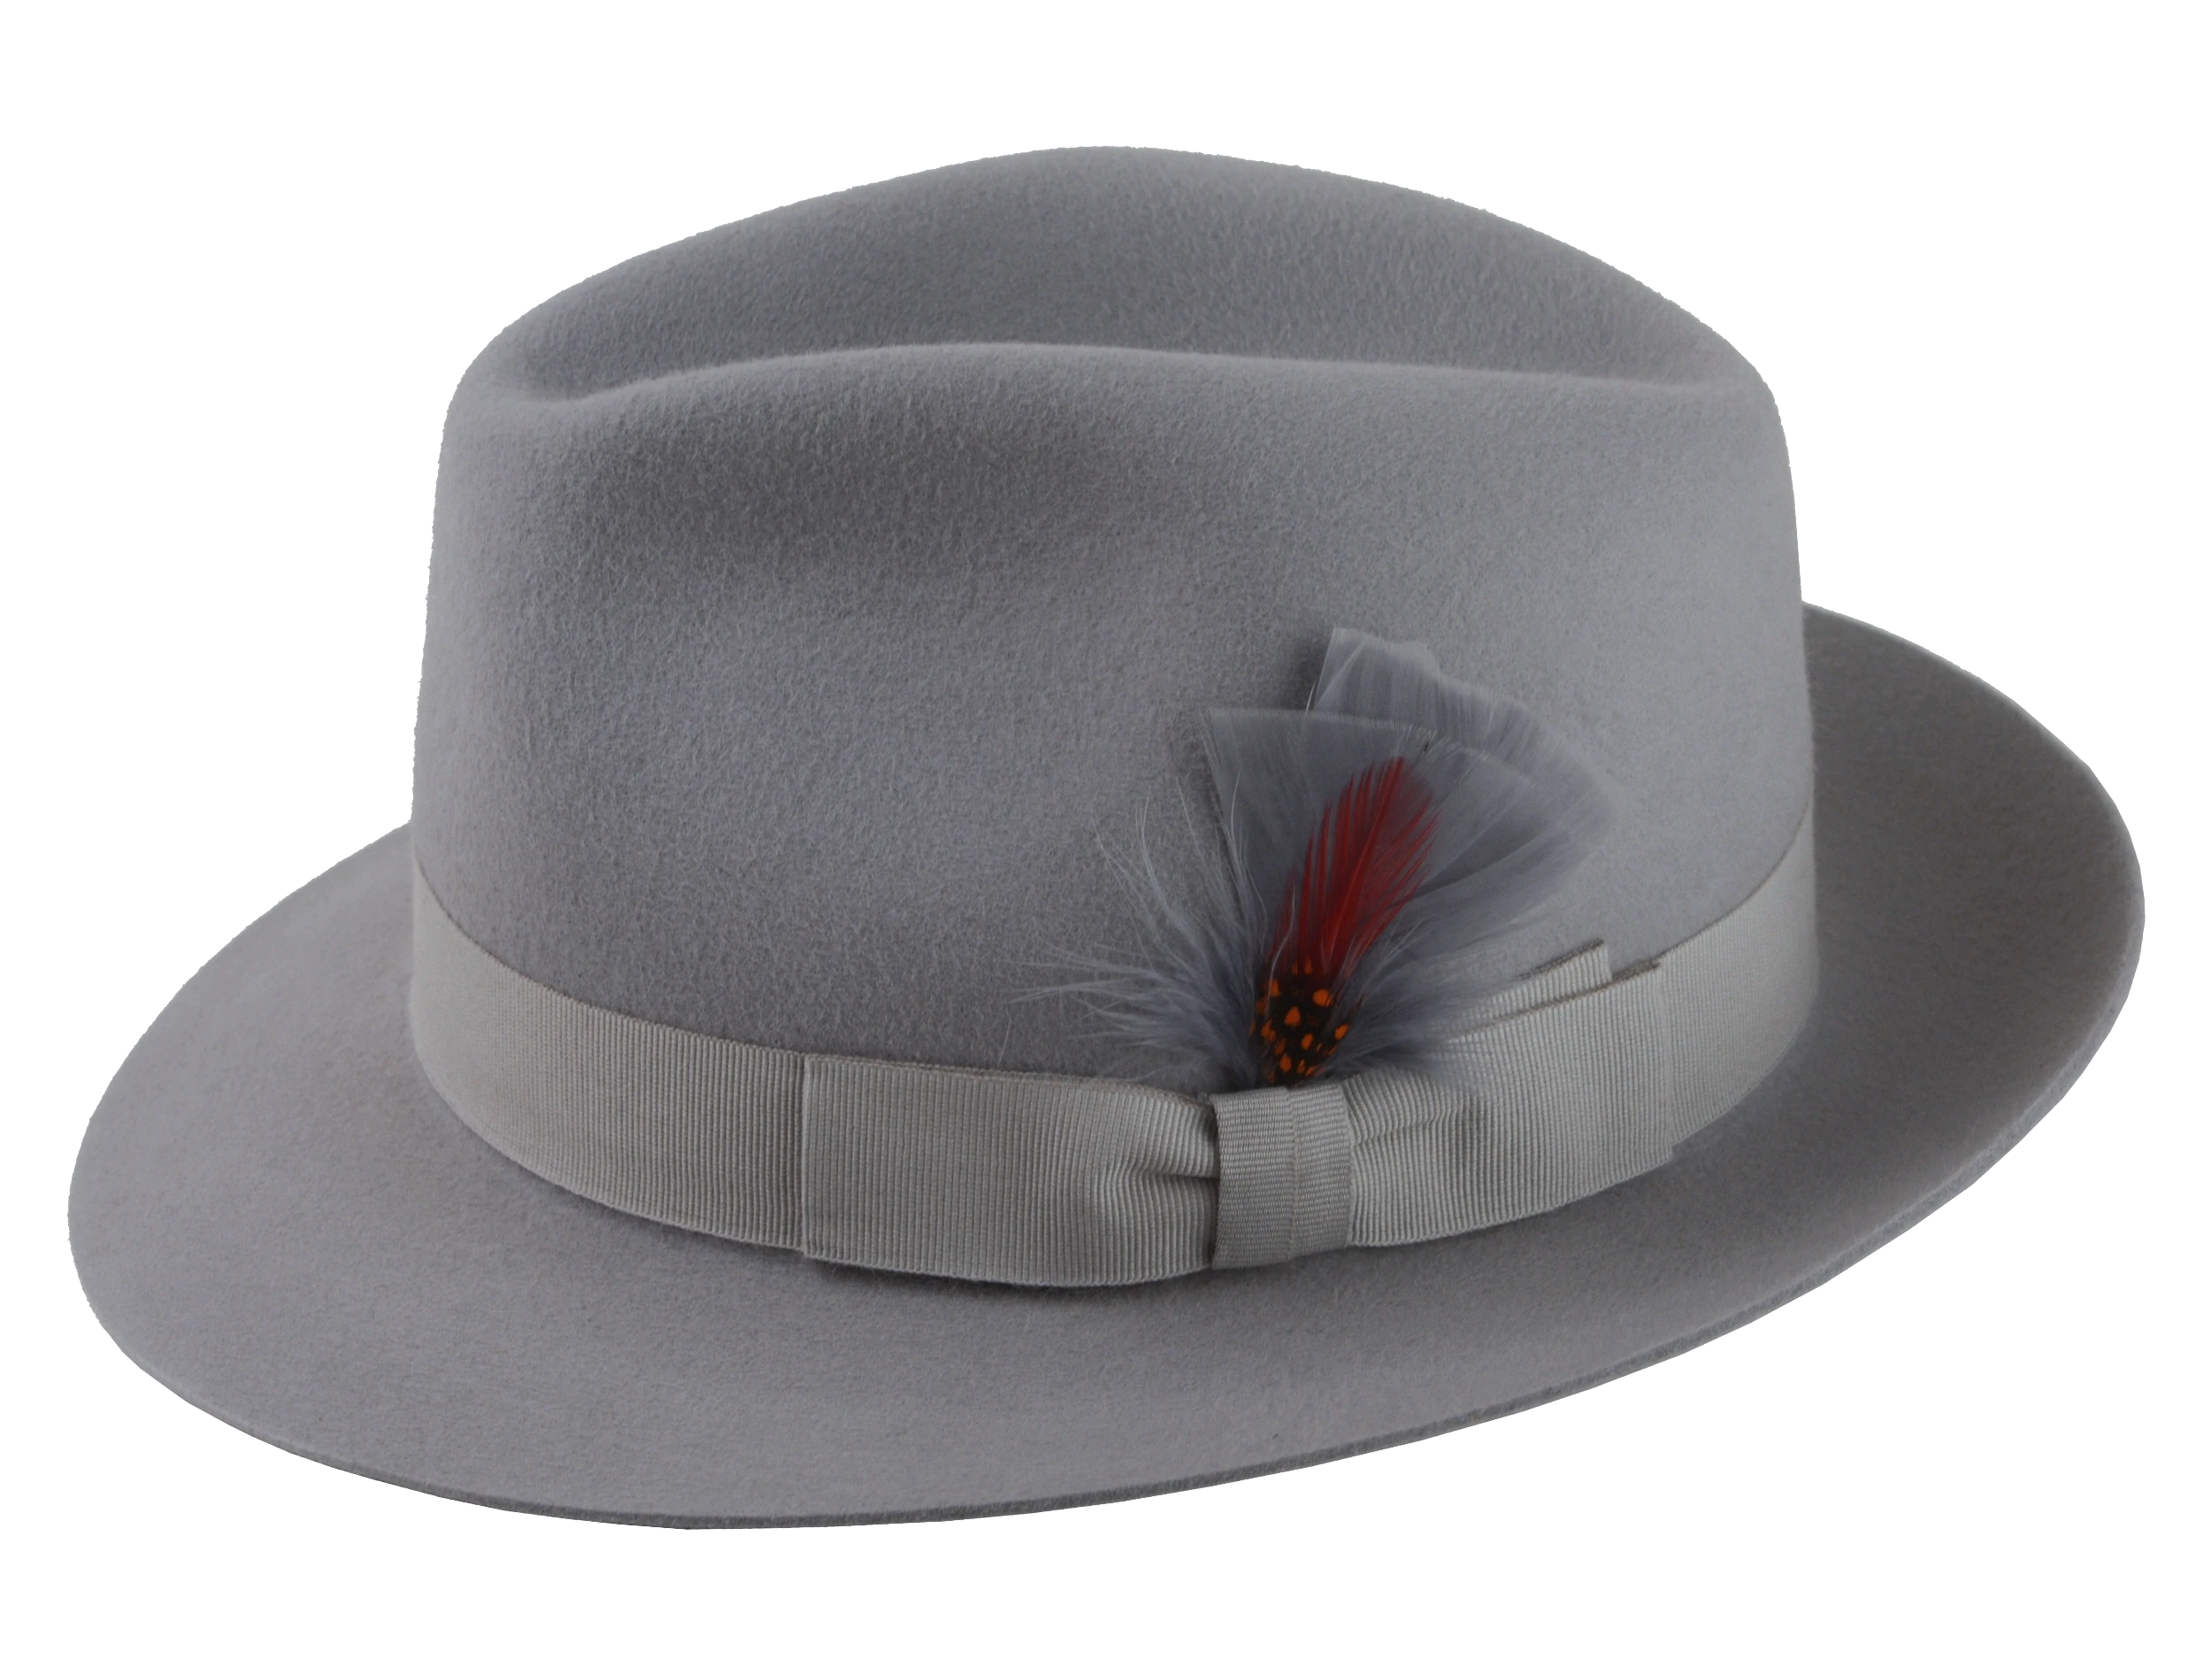 Side view of the Phoenix Fedora, focusing on the quality craftsmanship and stylish feather accent.